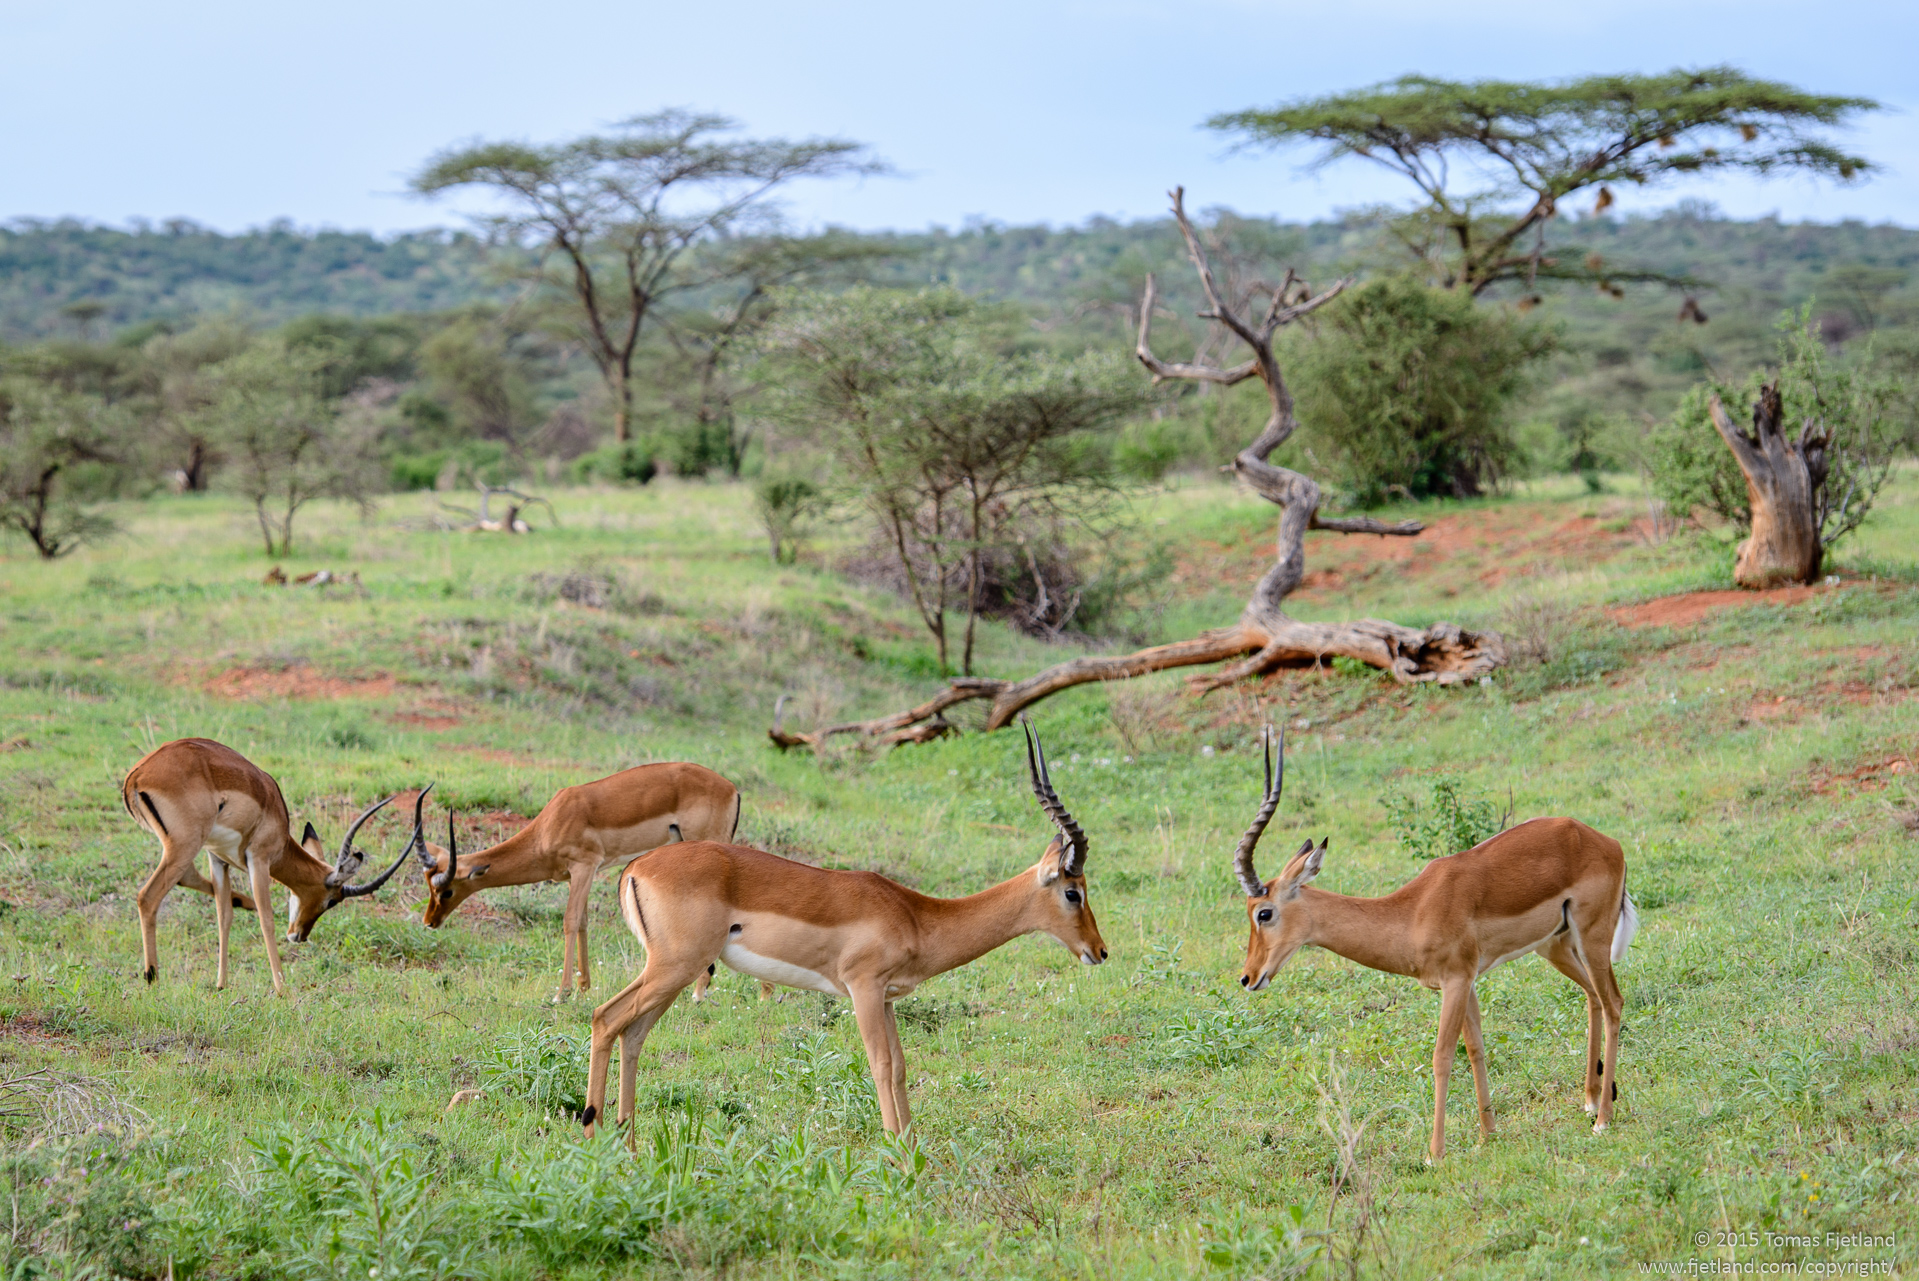 Young male Impalas that don't have their own hareem often form bachelor groups where they spend the days practicing their fighting skills so they're ready for the day they get a chance to challenge a buck with his own hareem